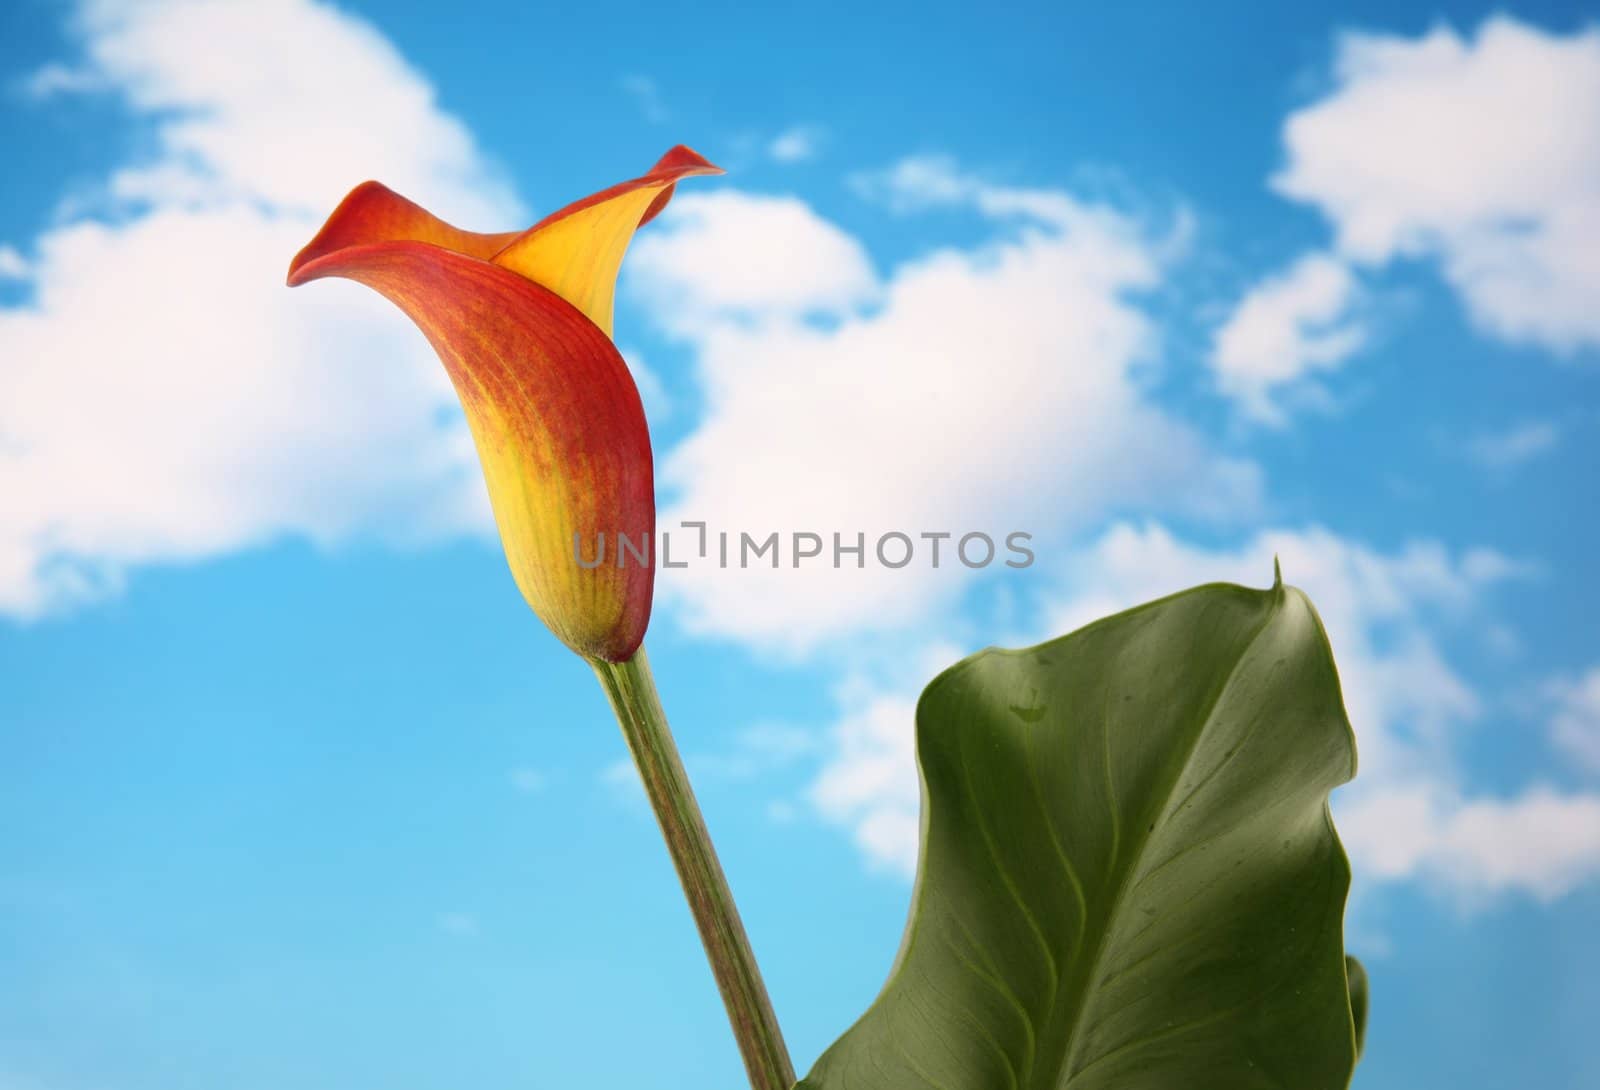 Beautiful single yellow and orange calla lilly flower isolated with a cloudy sky background